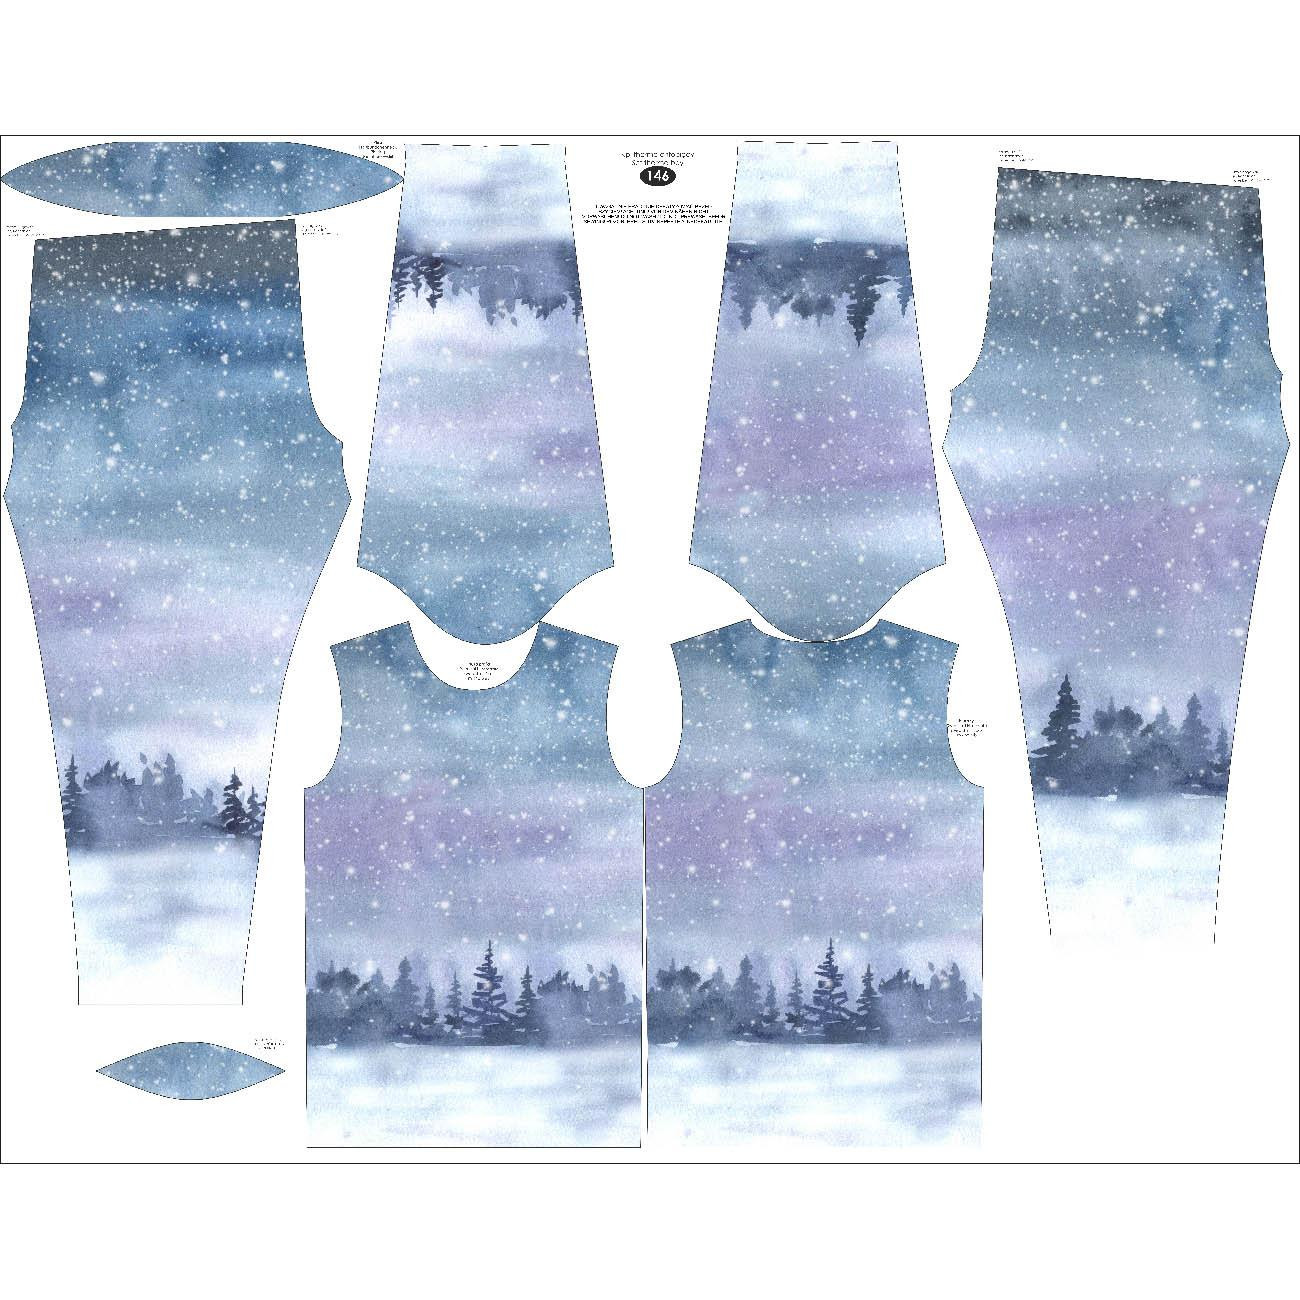 THERMO BOY'S SET (LUCAS) - WINTER LANDSCAPE PAT. 2 (PAINTED FOREST) - sewing set